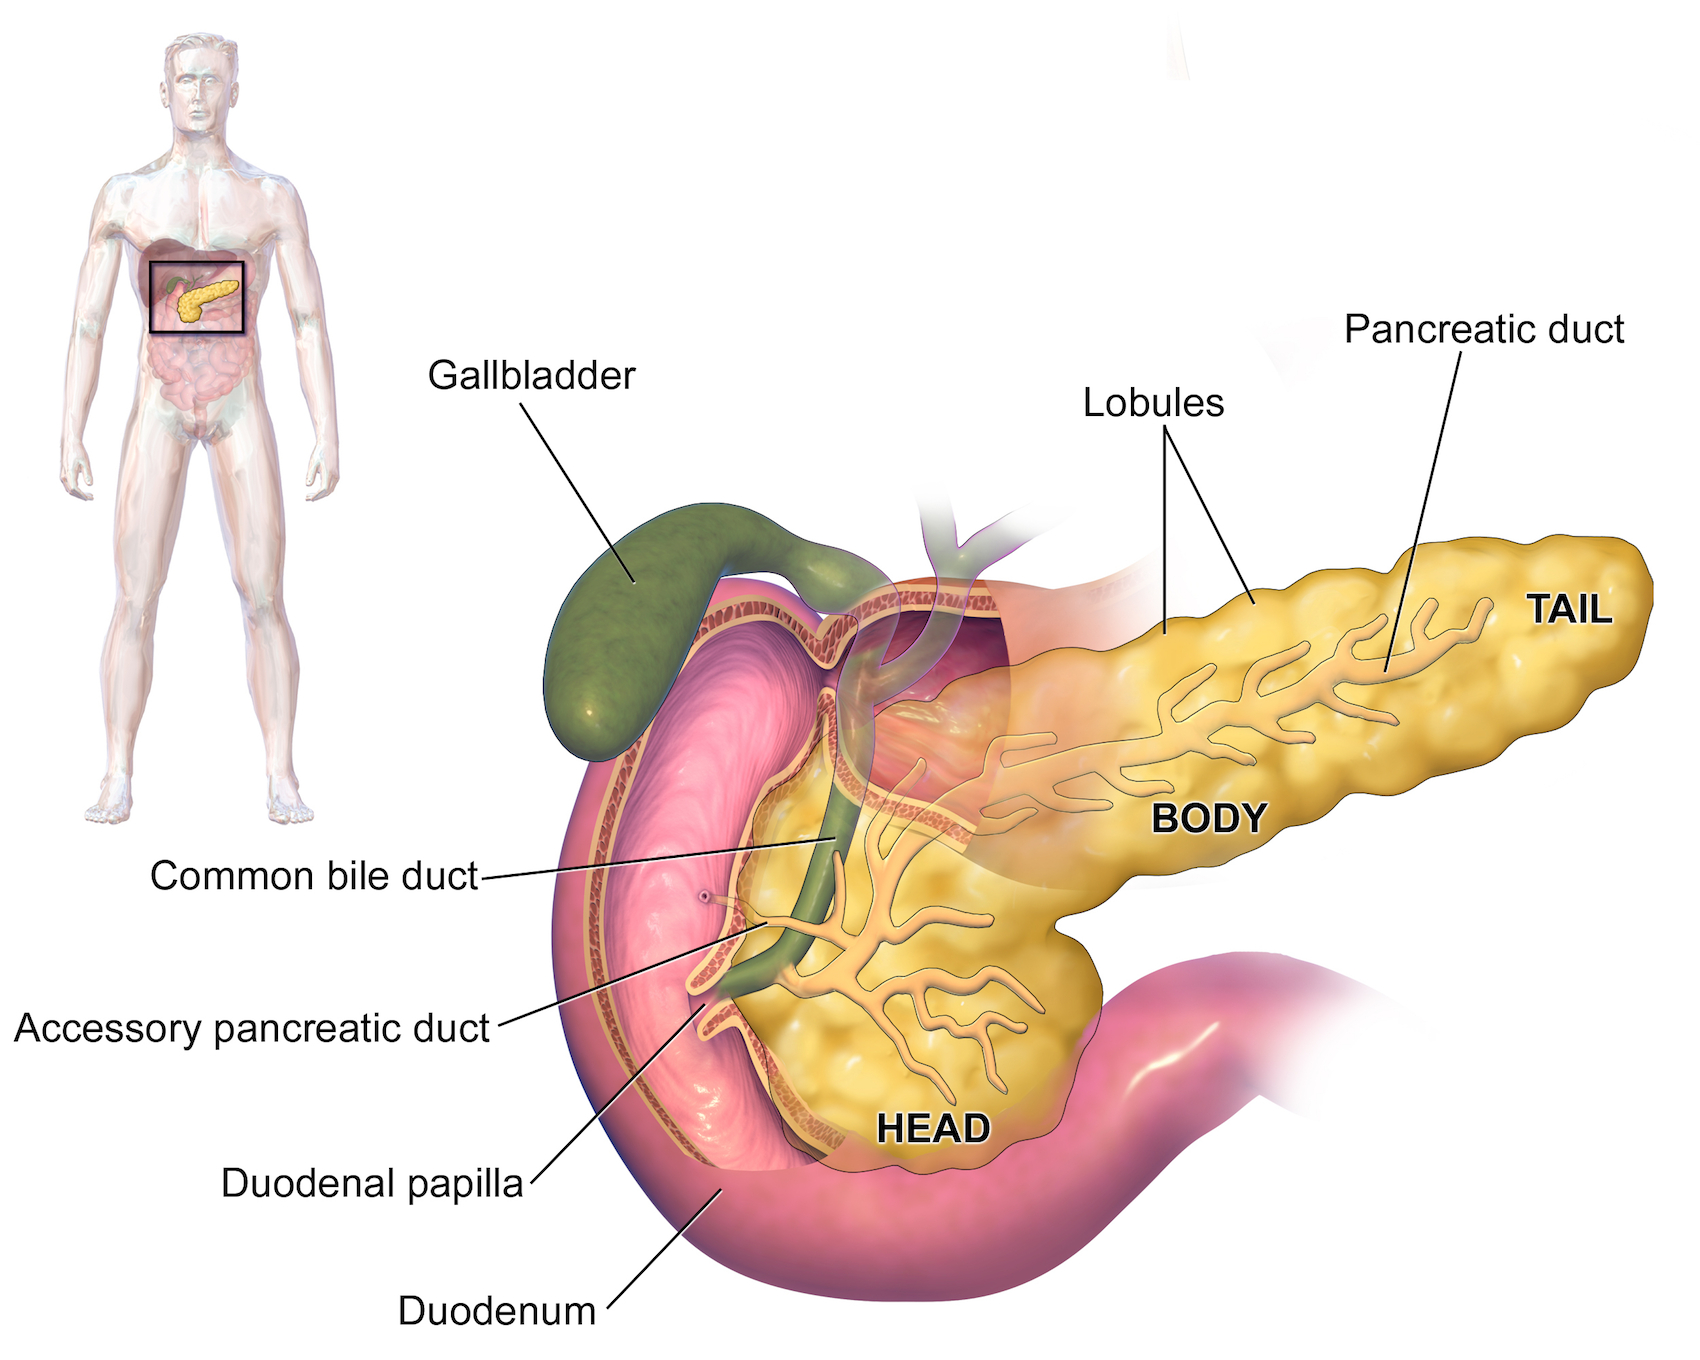 Gallbladder Pain Location Diagram Department Of Surgery Cholecystectomy Gallbladder Removal